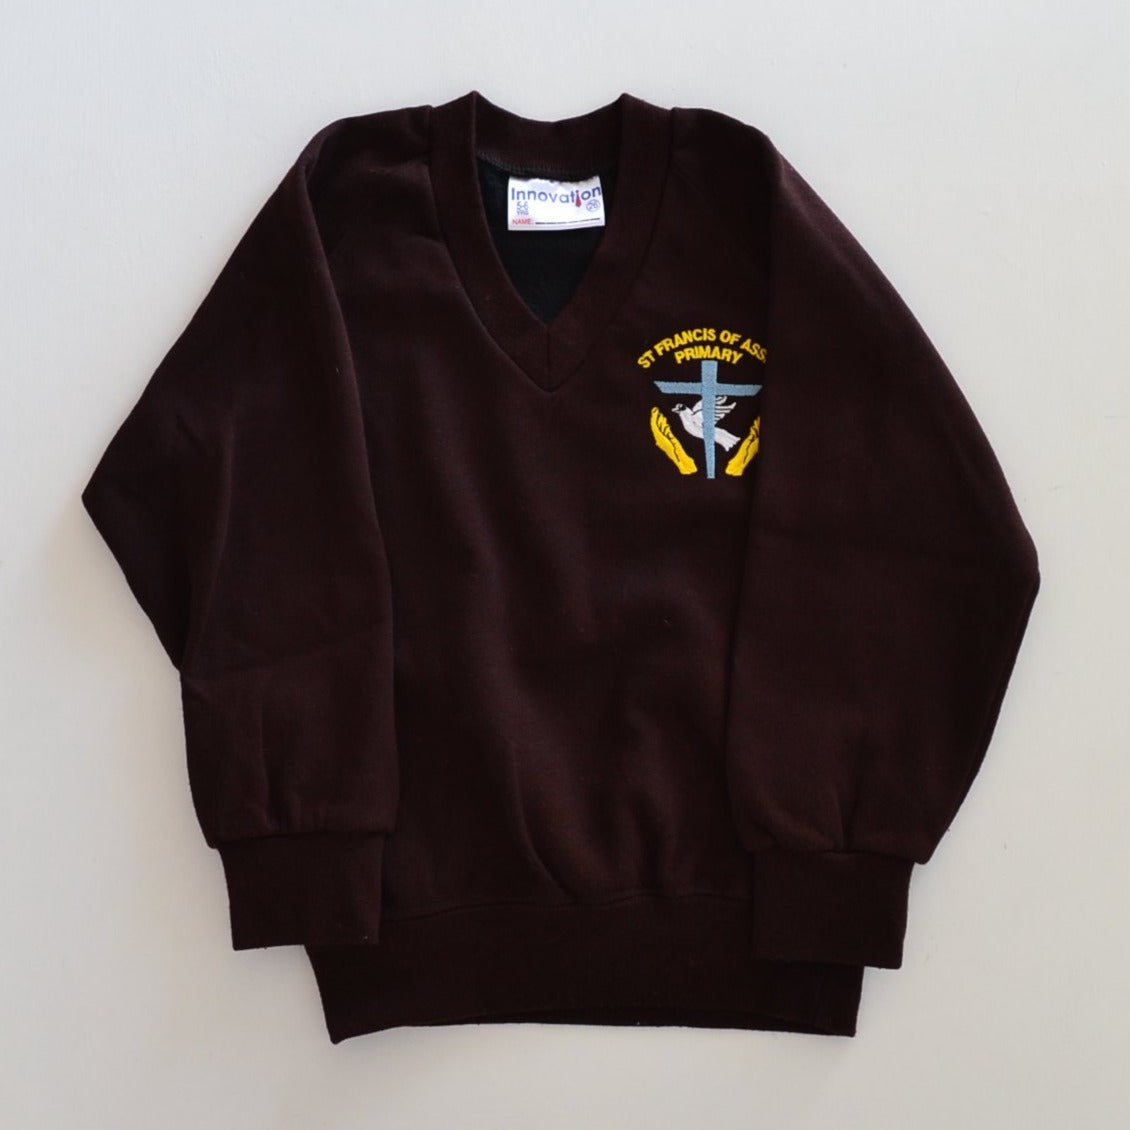 St. Francis of Assisi Primary - Sweatshirt - Brown V-neck